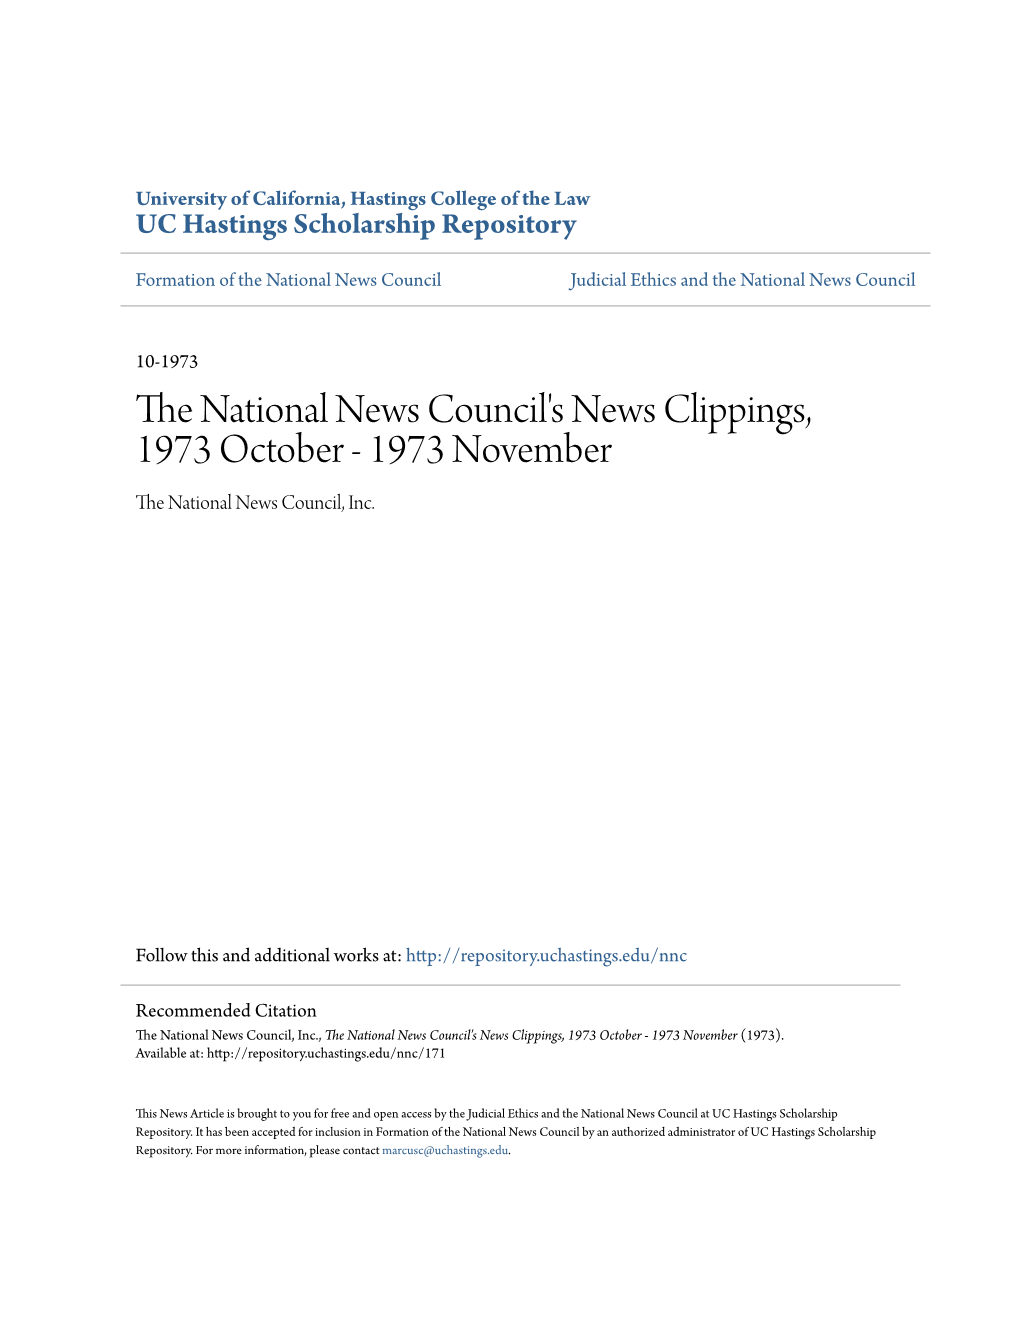 The National News Council's News Clippings, 1973 October - 1973 November (1973)